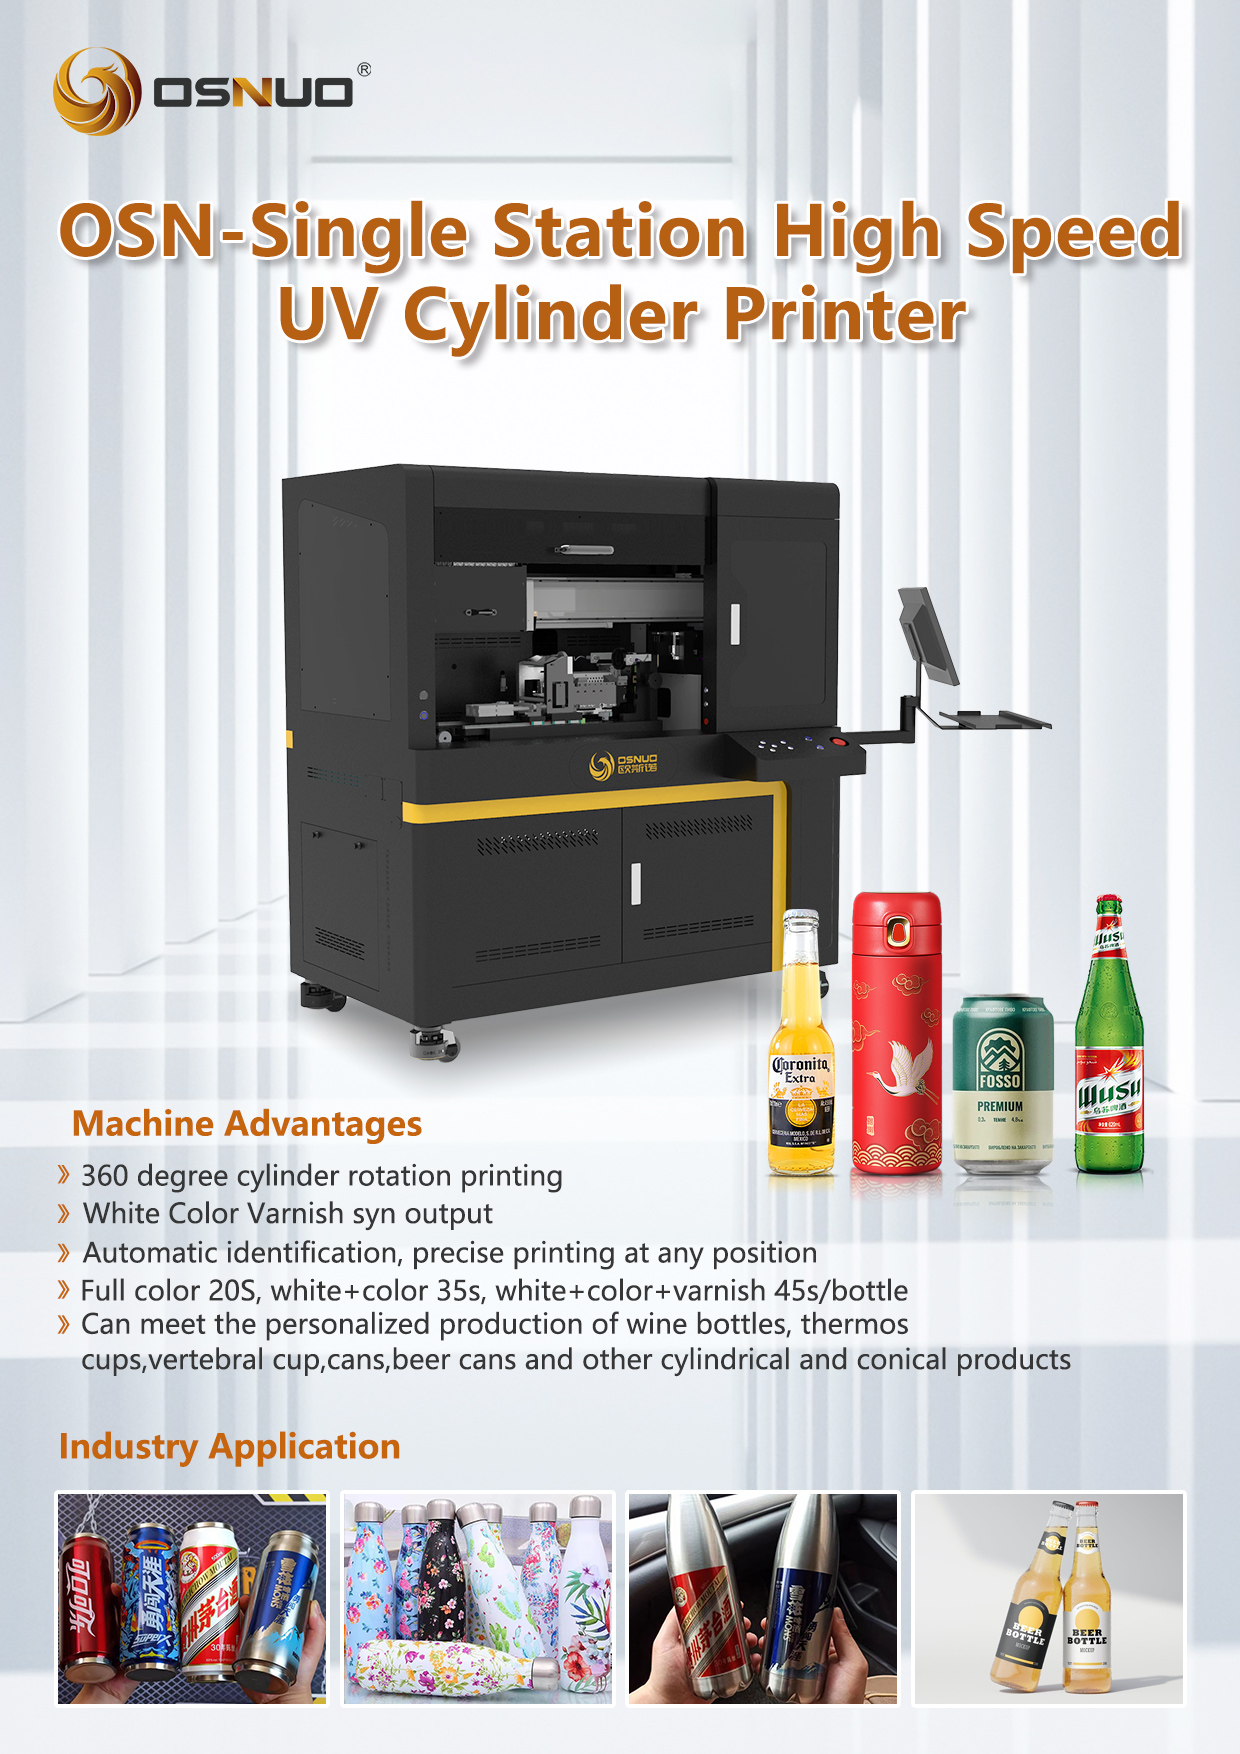 the OSNUO-single-station high-speed cylindrical UV printer